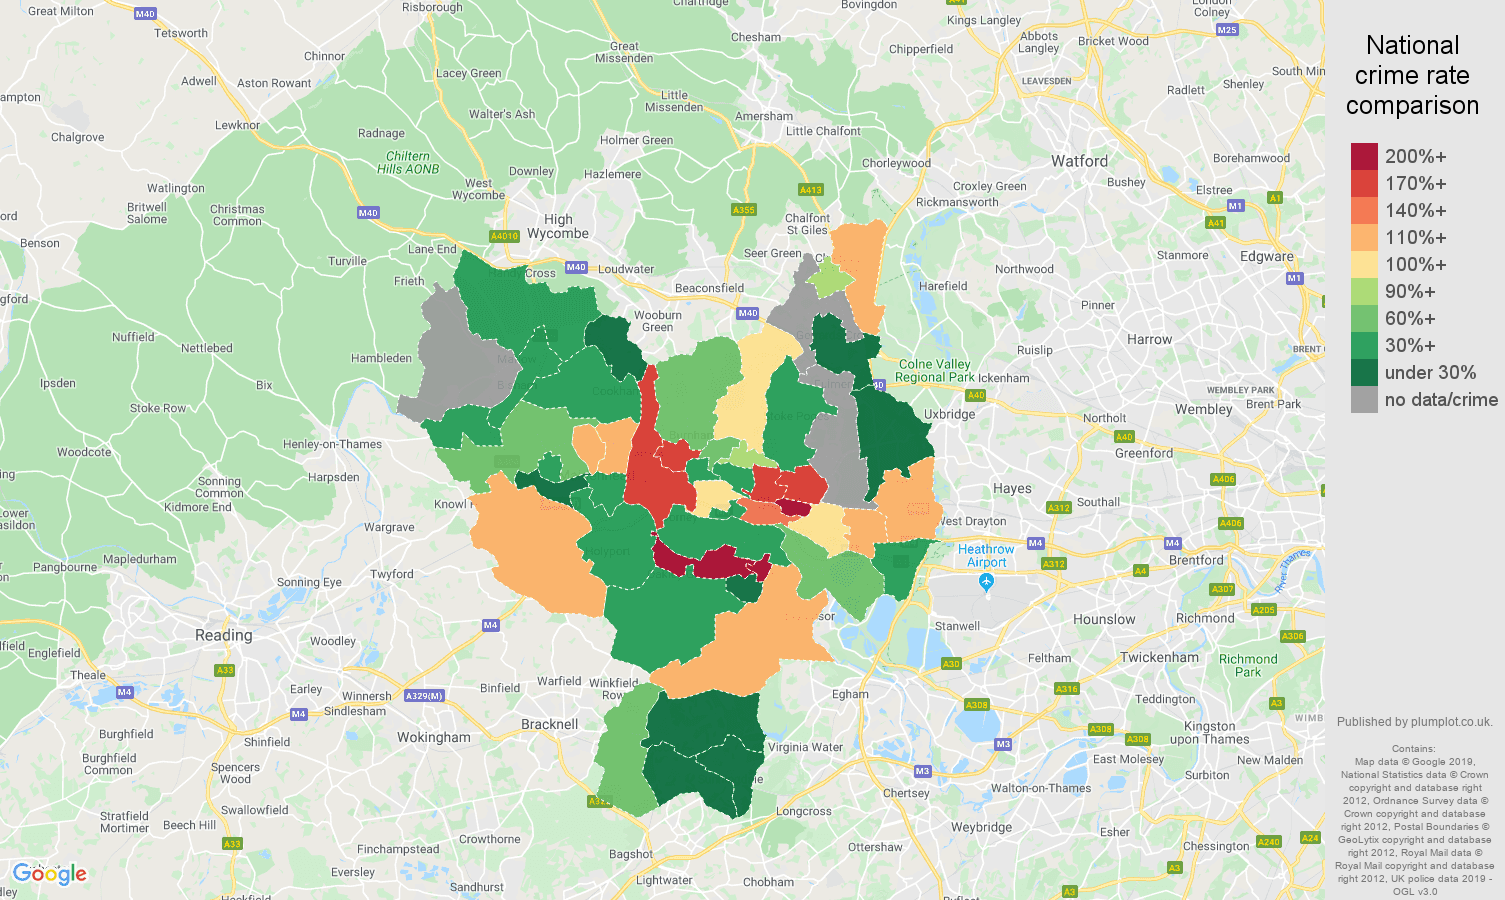 Slough possession of weapons crime rate comparison map